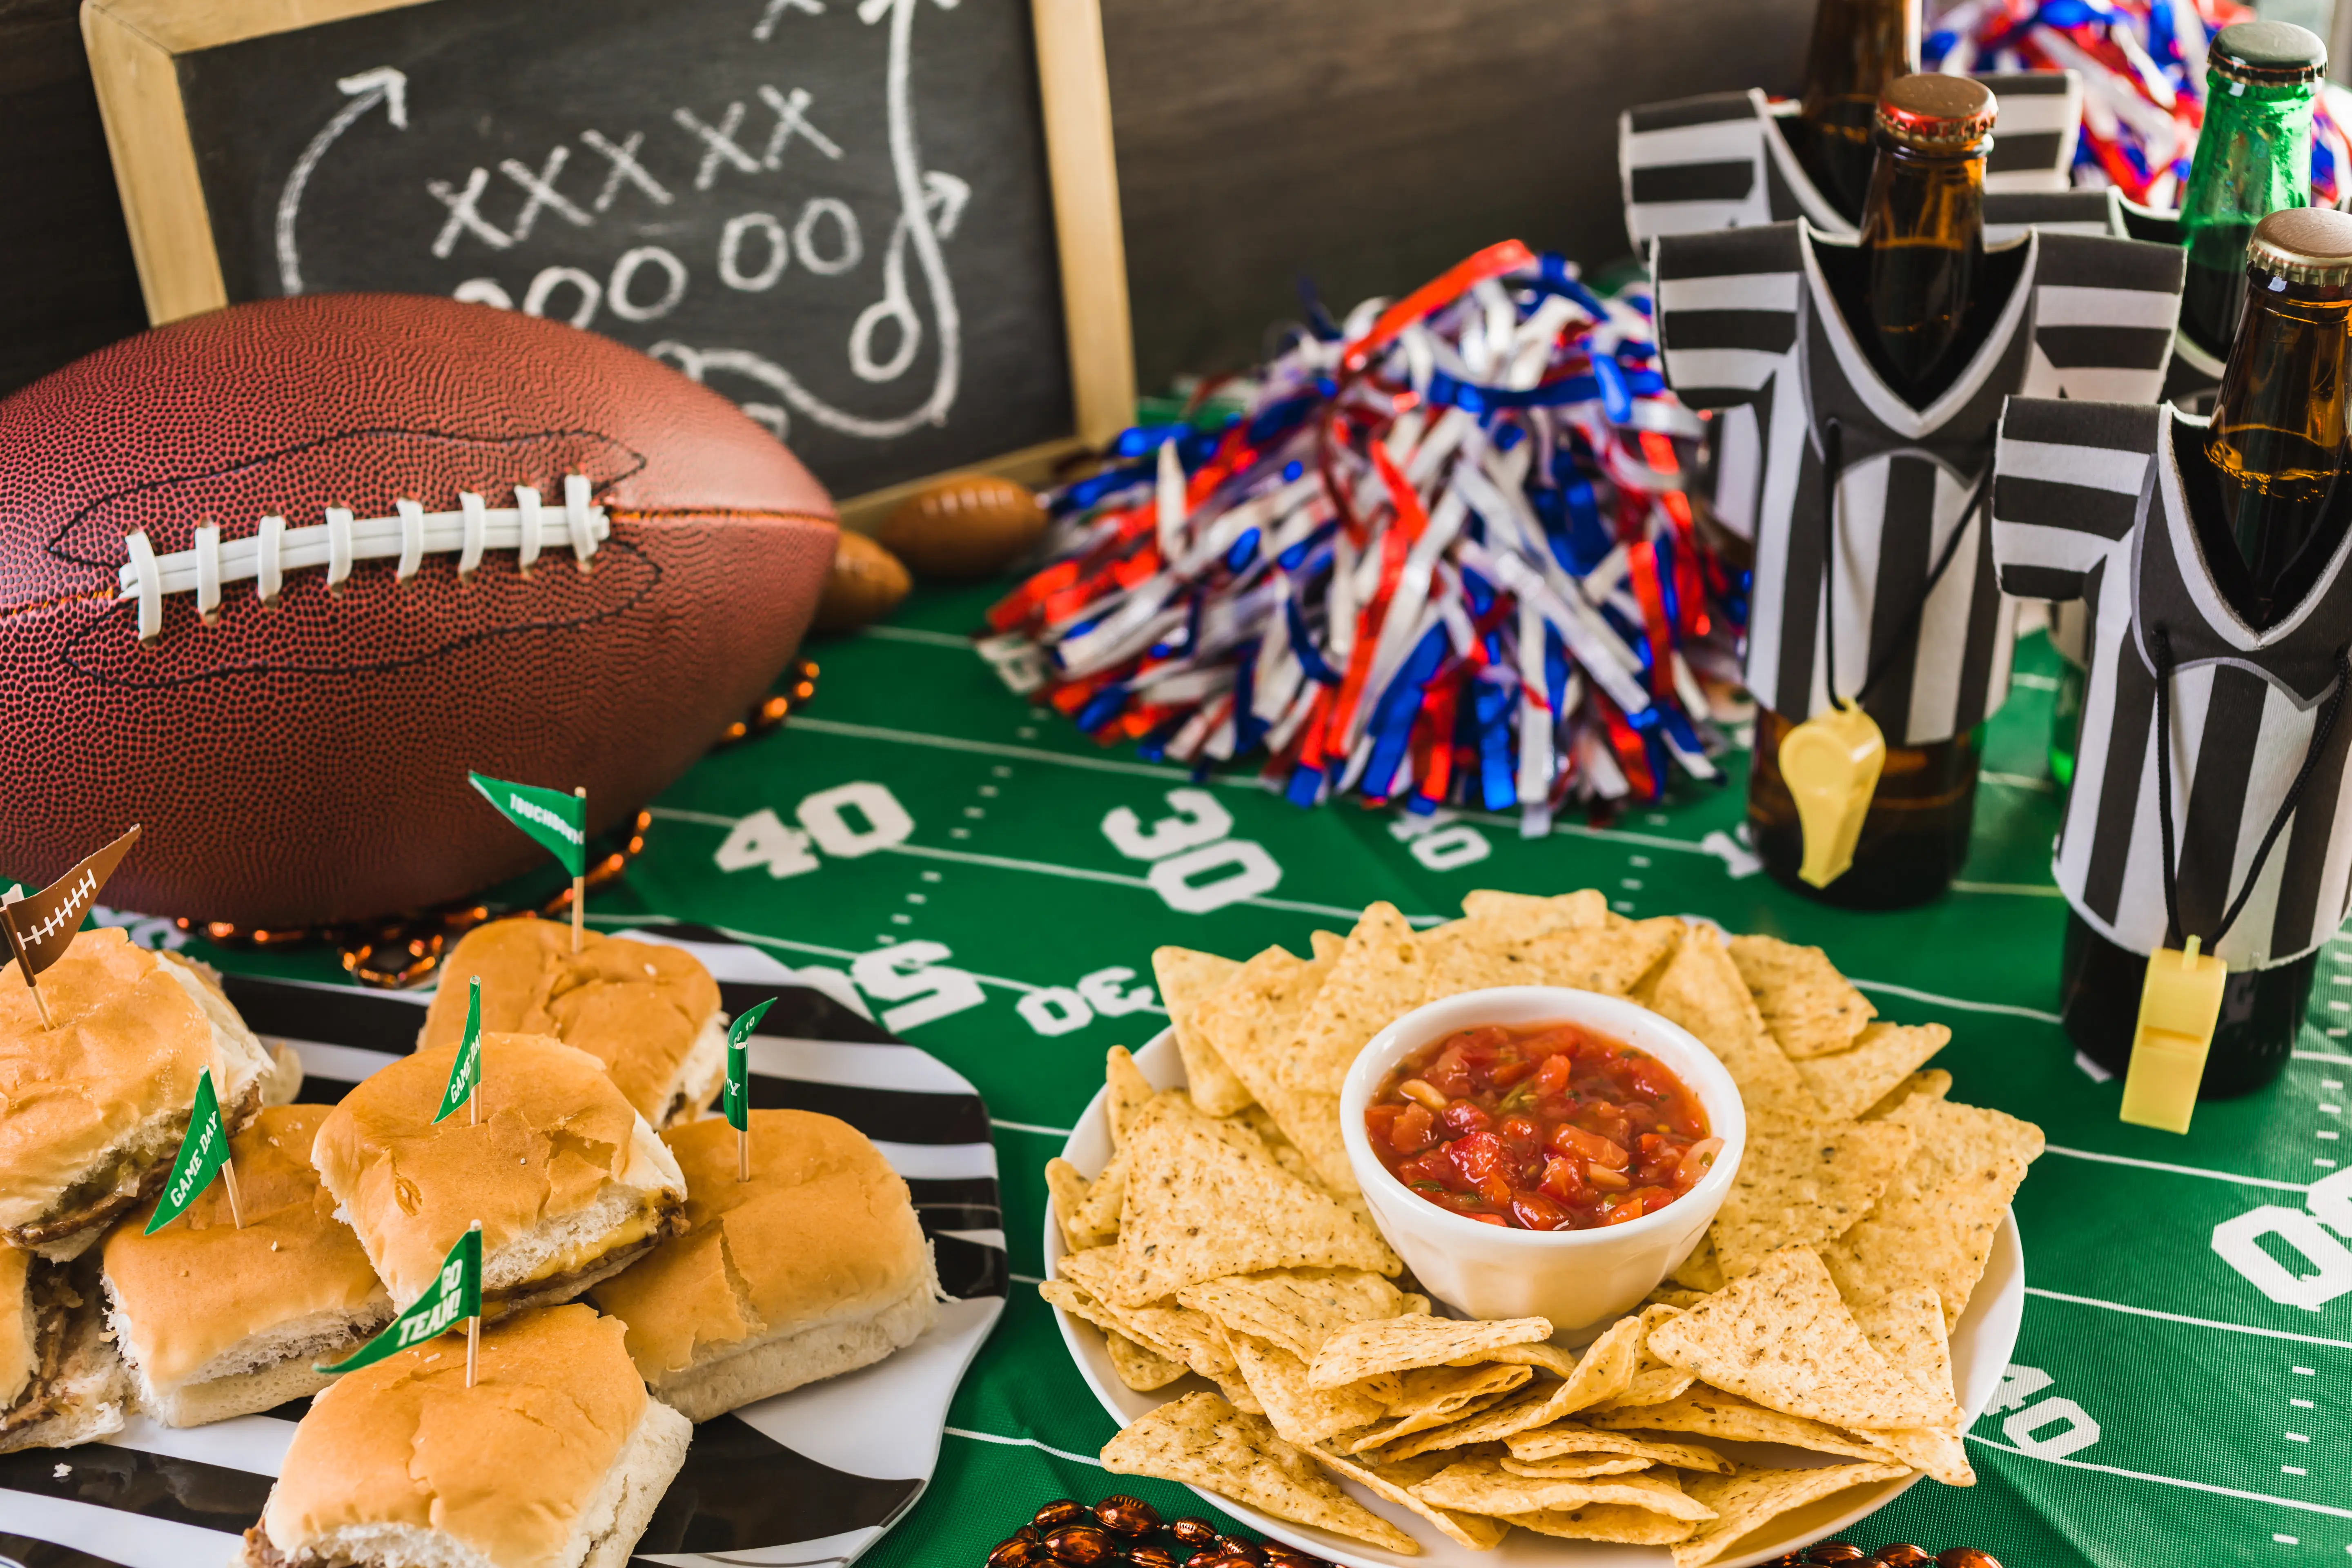 8 unavoidable recipes for the Super Bowl